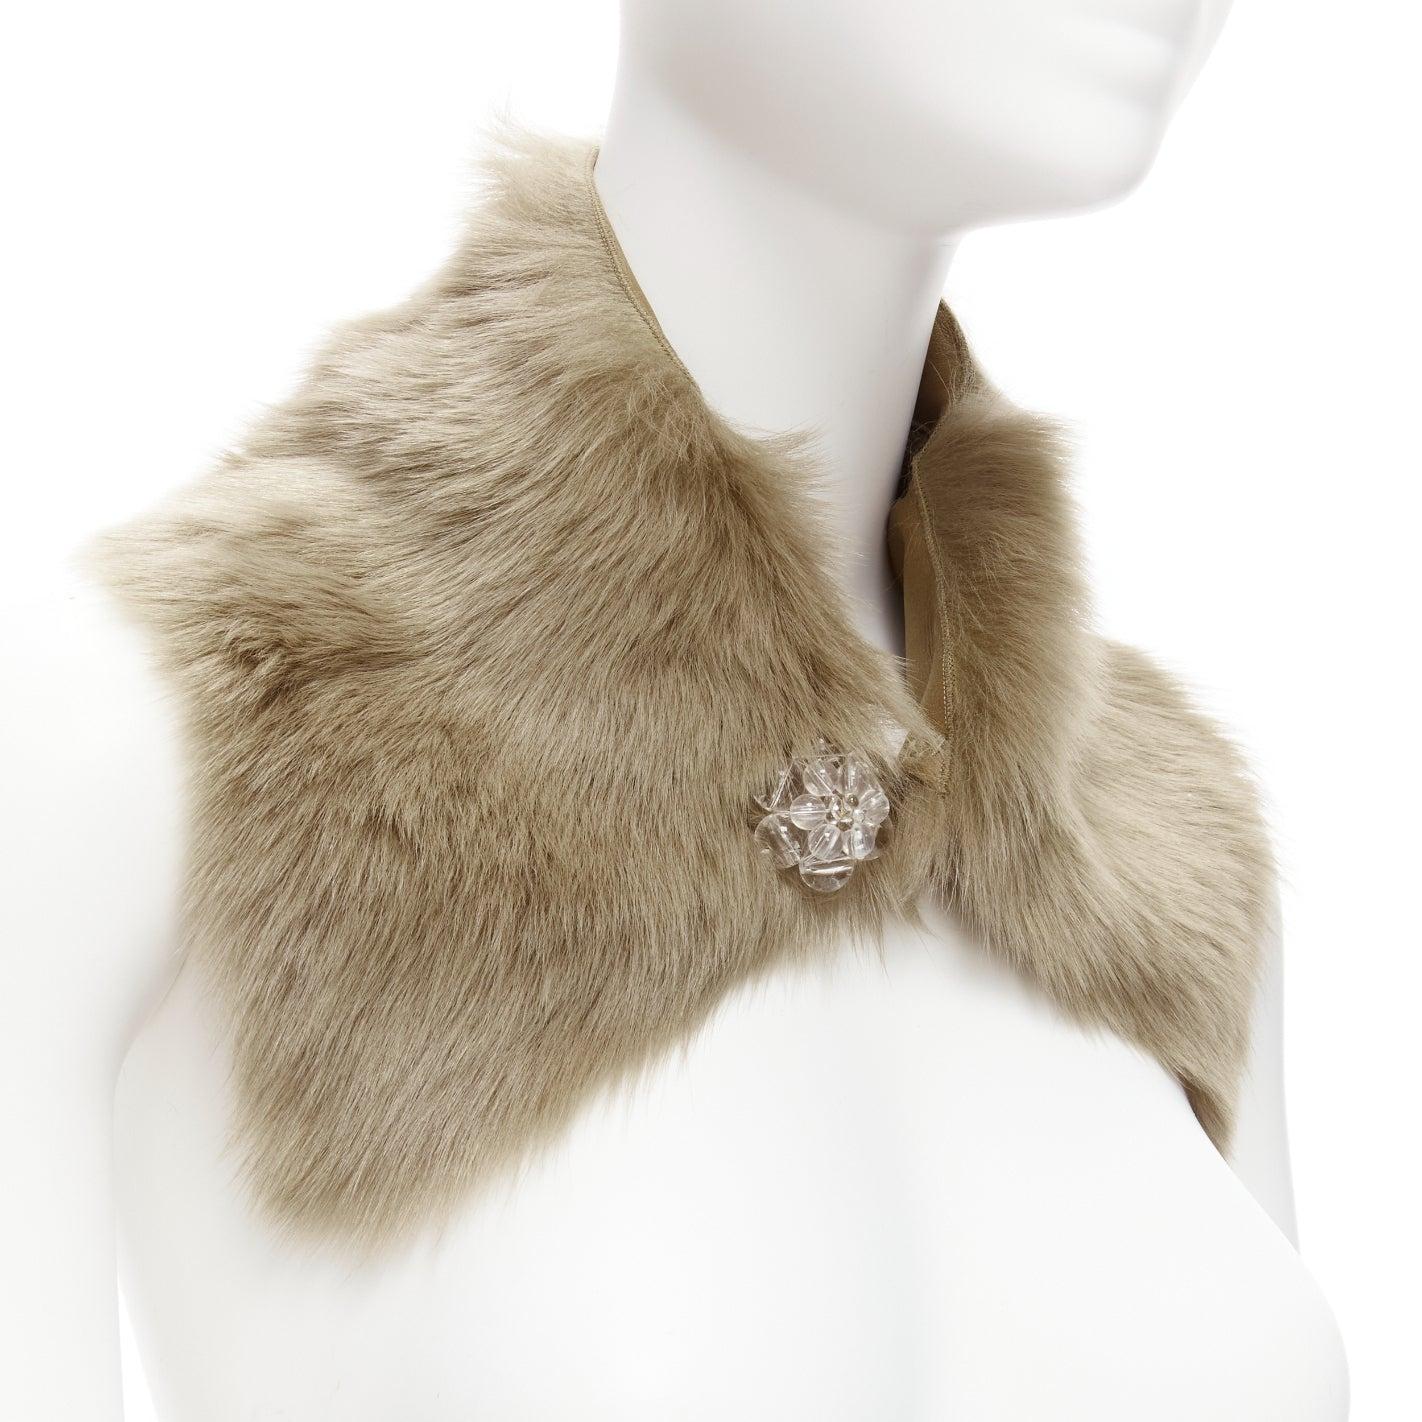 new SIMONE ROCHA brown genuine fur leather clear bead embellished collar
Reference: SNKO/A00352
Brand: Simone Rocha
Material: Fur, Plastic
Color: Brown, Clear
Pattern: Solid
Closure: Button
Lining: Brown Leather
Extra Details: Clear bead embellished